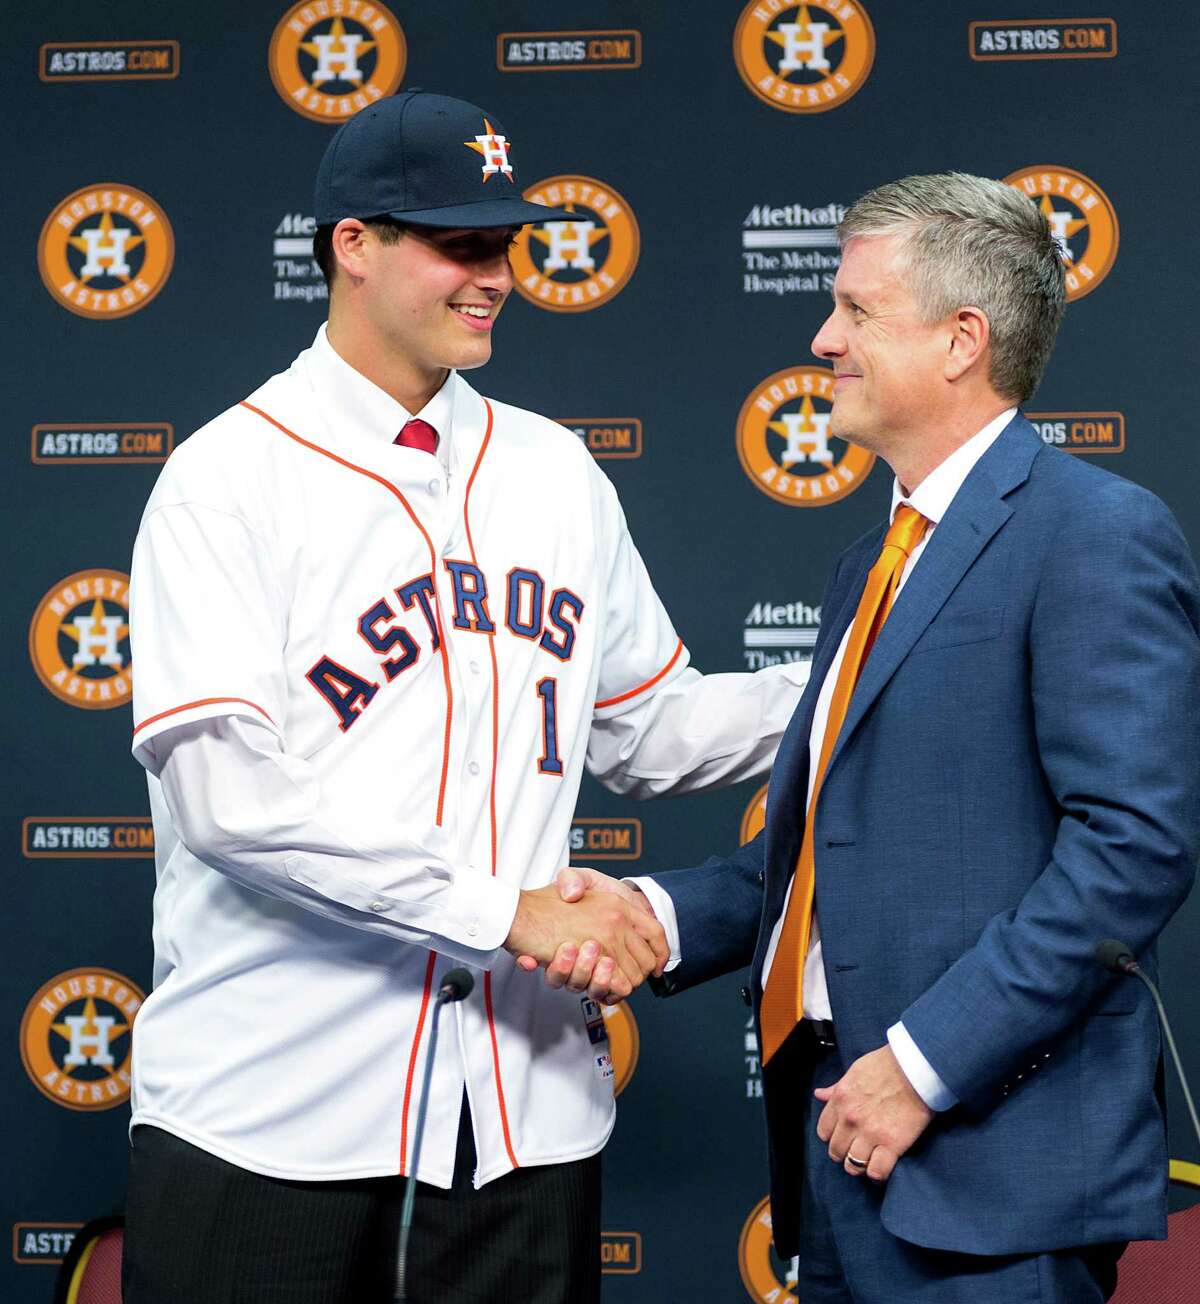 Neither Mark Appel nor general manager Jeff Luhnow could have imagined when Appel was drafted in 2013 that he would be struggling in Class A more than a year later.